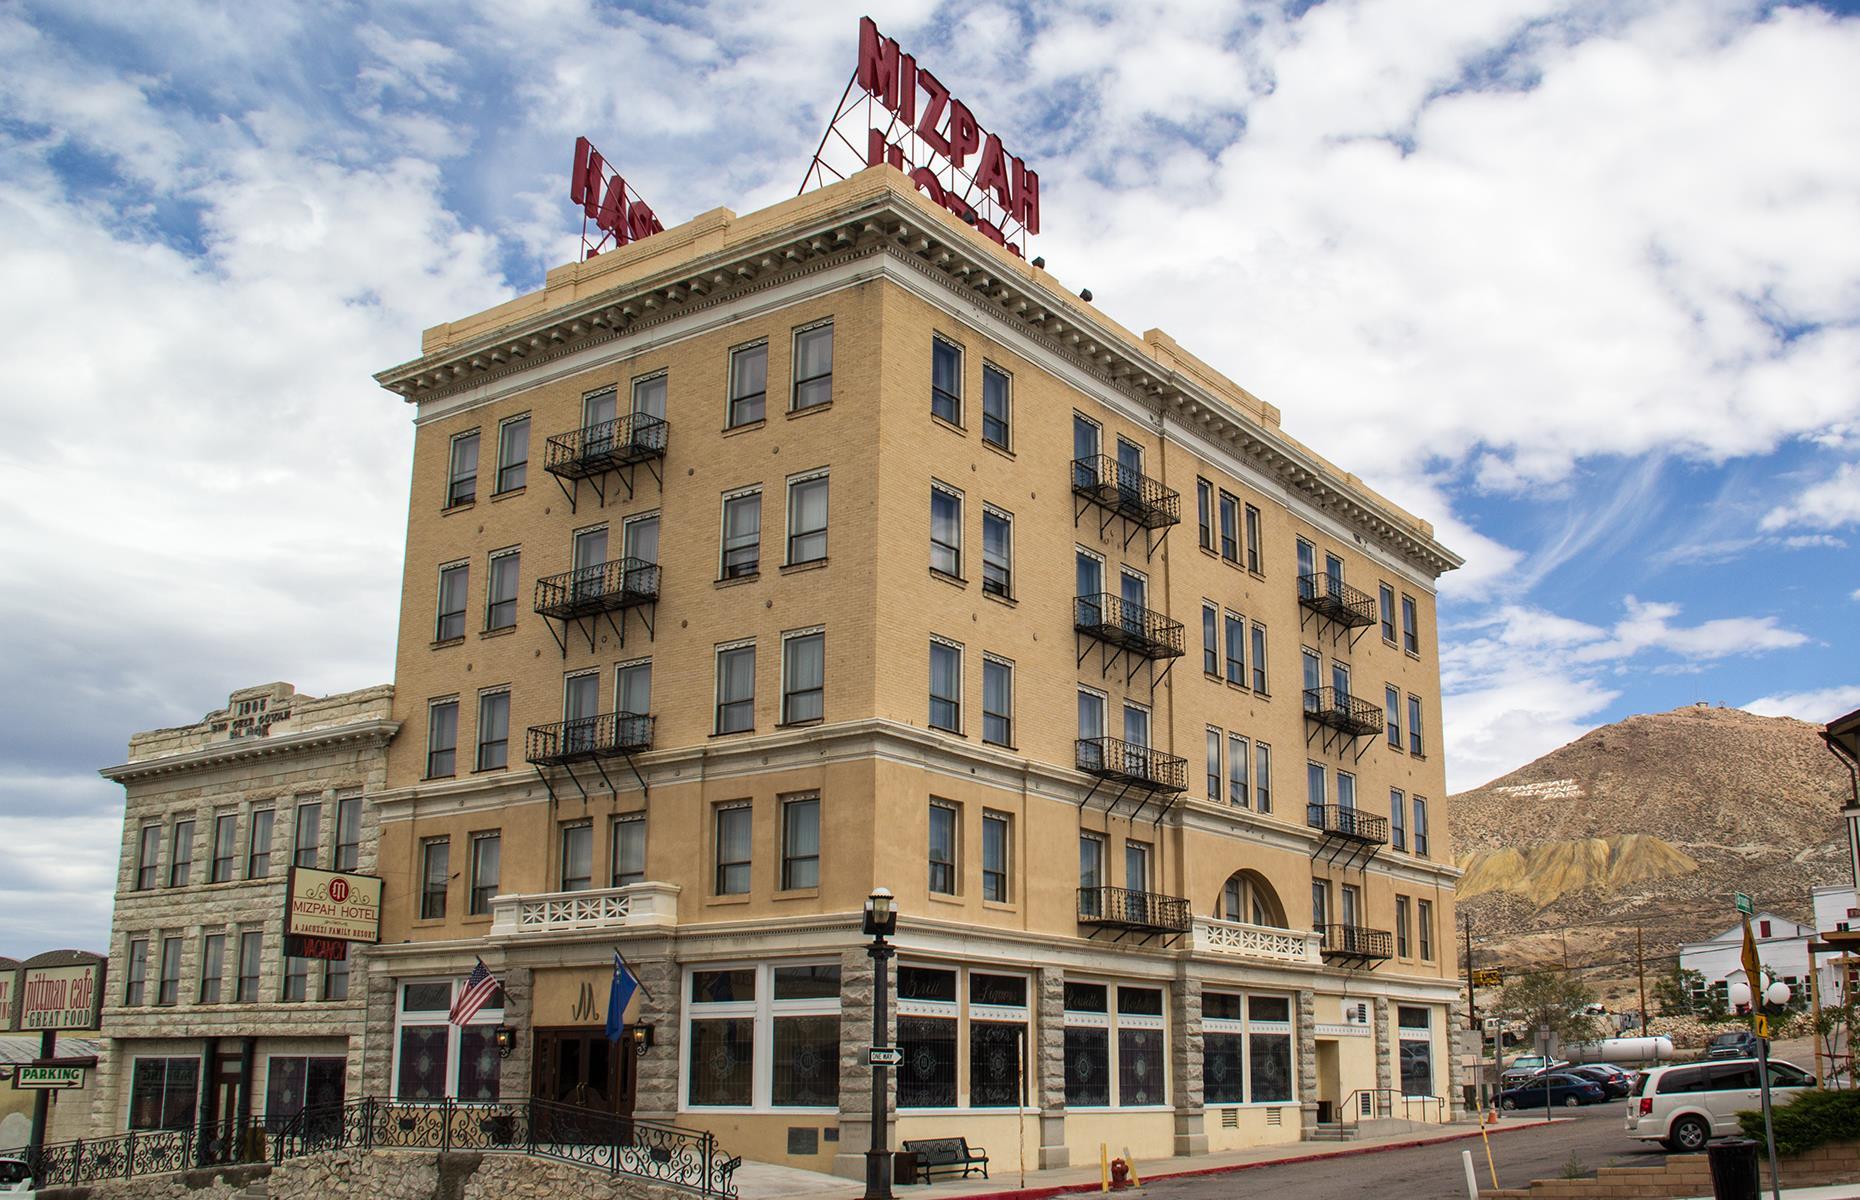 <p><a href="https://www.themizpahhotel.com/">The Mizpah Hotel</a> – which sprang up in 1907 when Tonopah was a thriving mining town – is no stranger to lists of America's most haunted places. It's known as the "Jewel of the Desert" for its opulent suites, all heavy red drapes and glistening chandeliers, and since it reopened in 2011 after more than a decade of desertion, it's embraced its reputation for phantoms and frights. It's said that the ghosts here are the friendly kind, and they include the Lady in Red, the spirit of a woman tragically murdered by her lover. She apparently leaves pearls for guests she takes a particular liking to.</p>